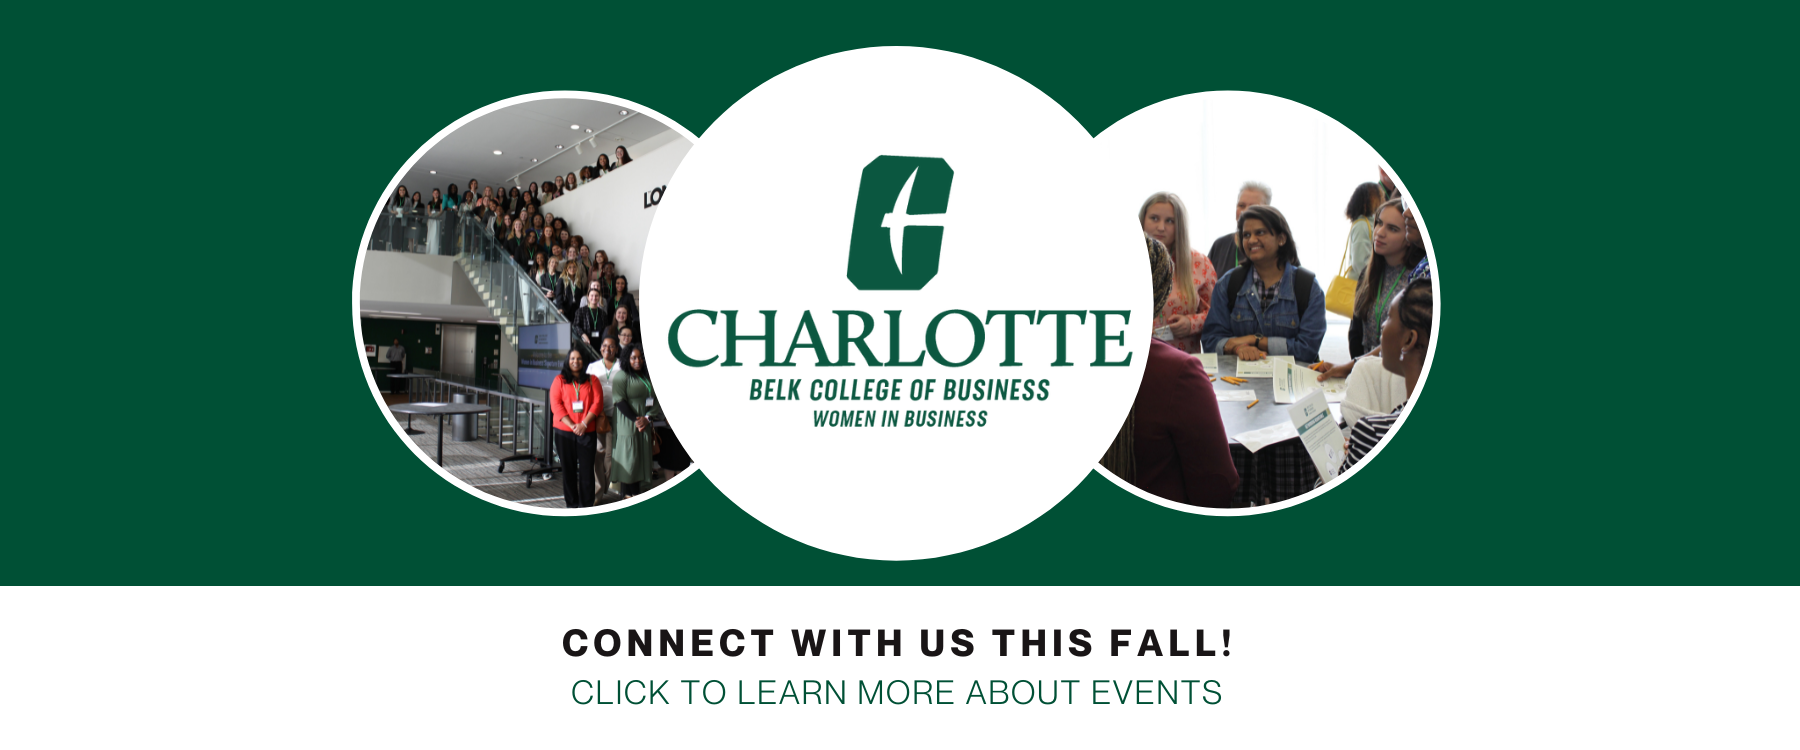 Connect with us this fall. Click to learn about upcoming events. 